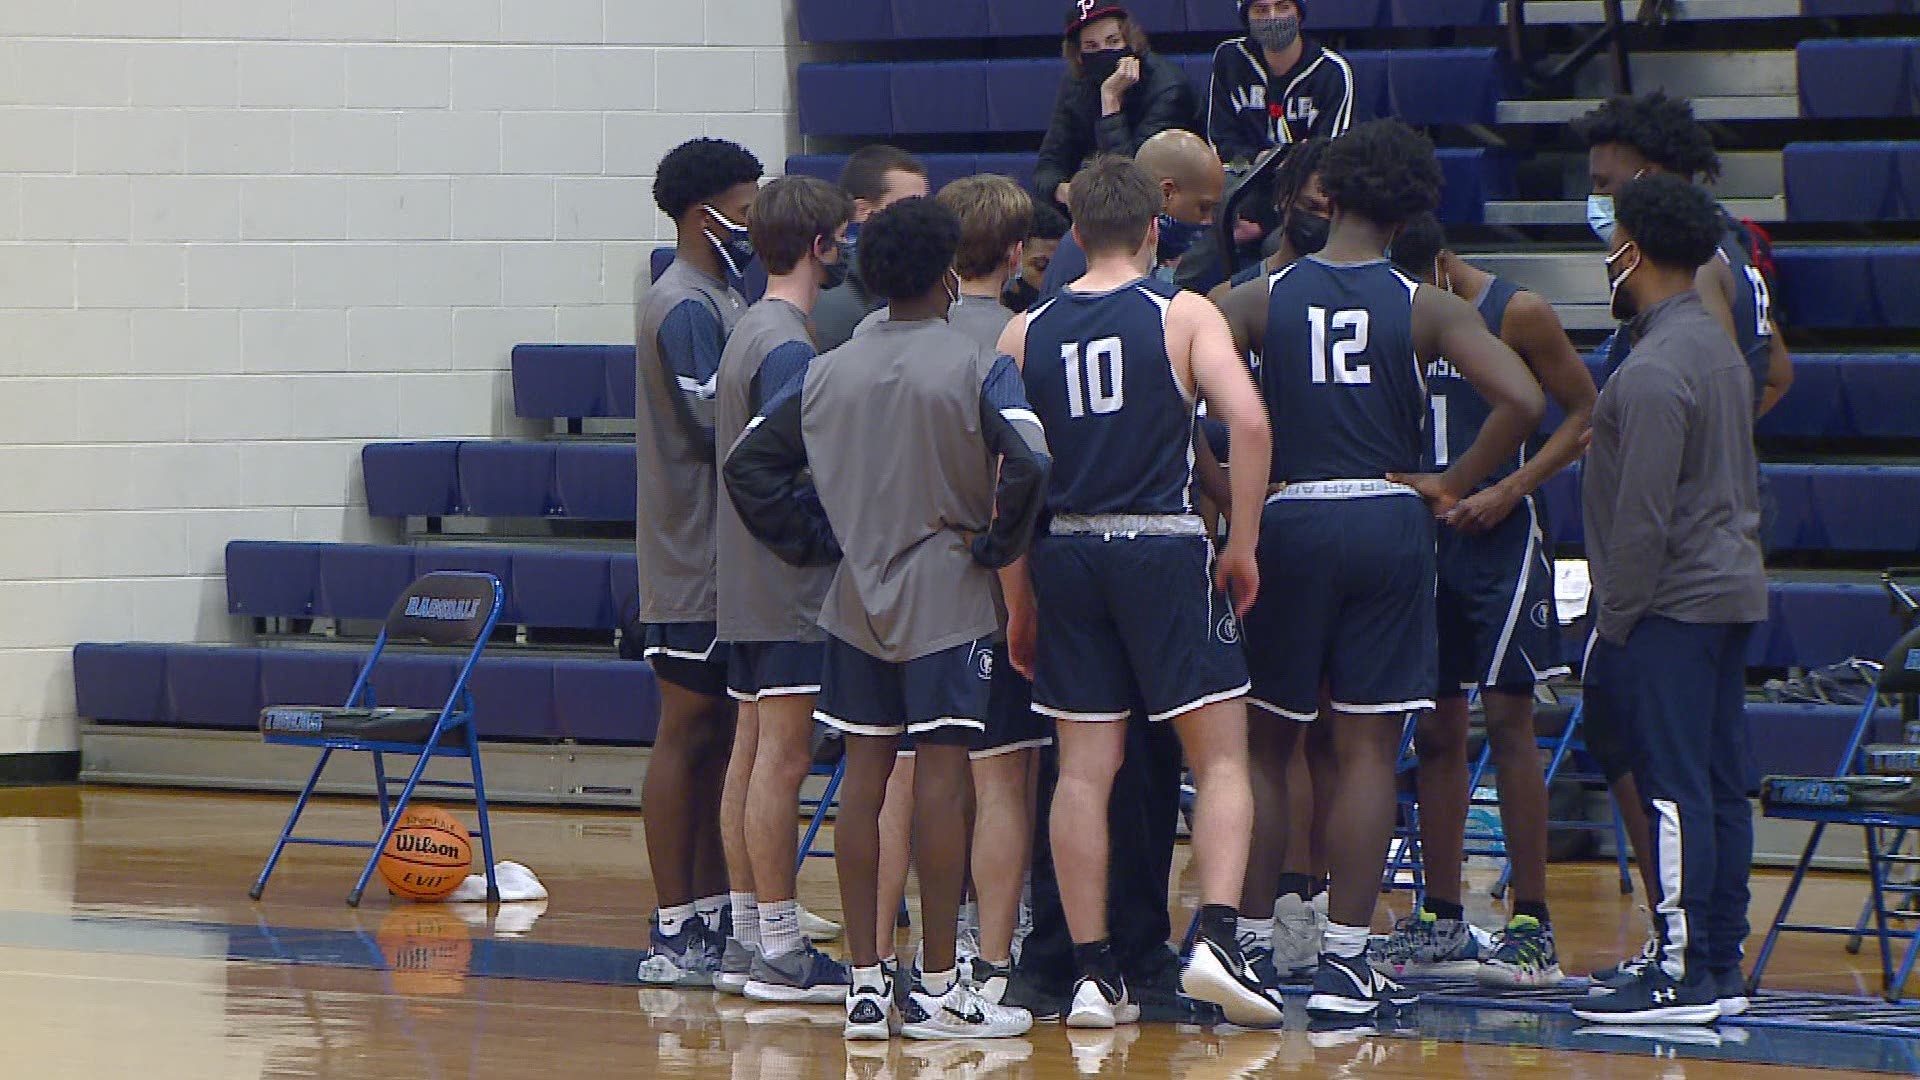 This one goes to OT with Grimsley winning 68-60.  The Whirlies are 3-0 on the season.